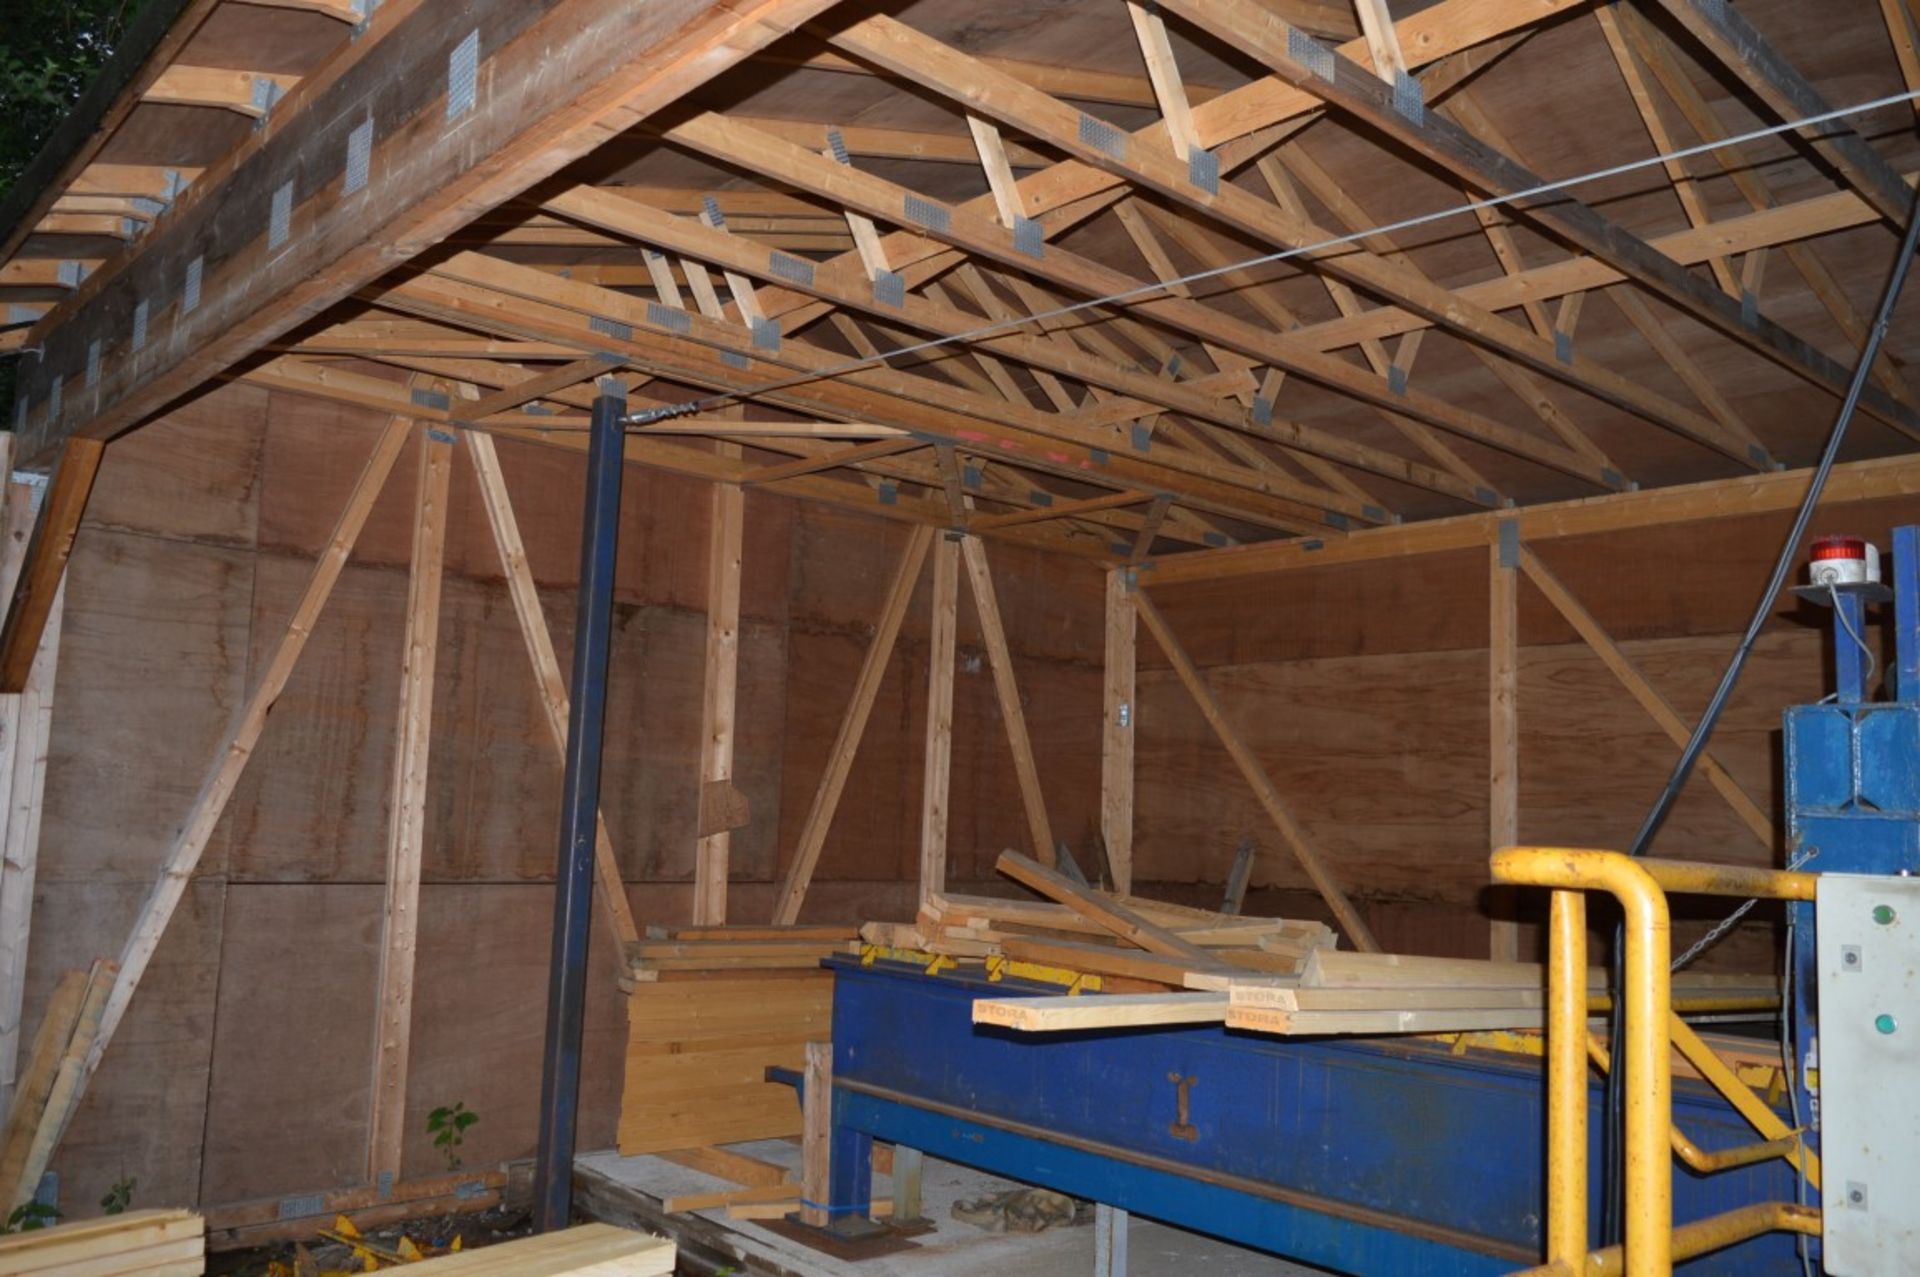 1 x Large Purpose Built Canopy Shed - Super Chord Purlin Construction With OSB Felted Roof - - Image 6 of 9